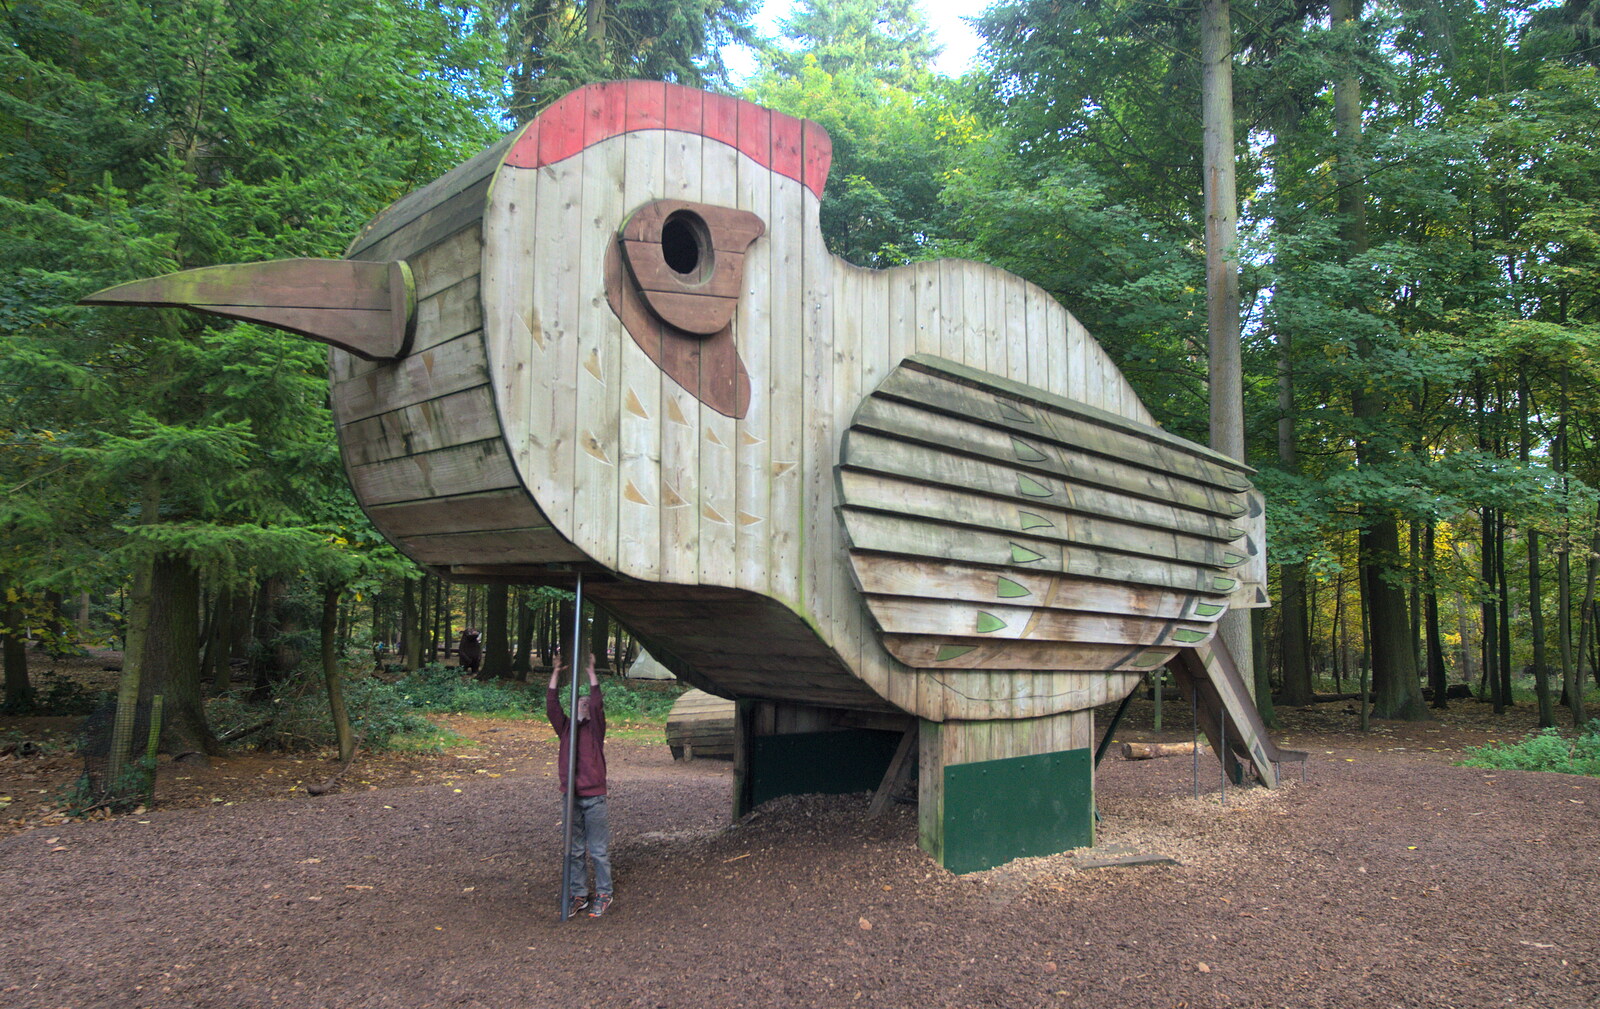 The boys play in a giant woodpecker from A Day at High Lodge, Brandon Forest, Suffolk - 26th October 2015